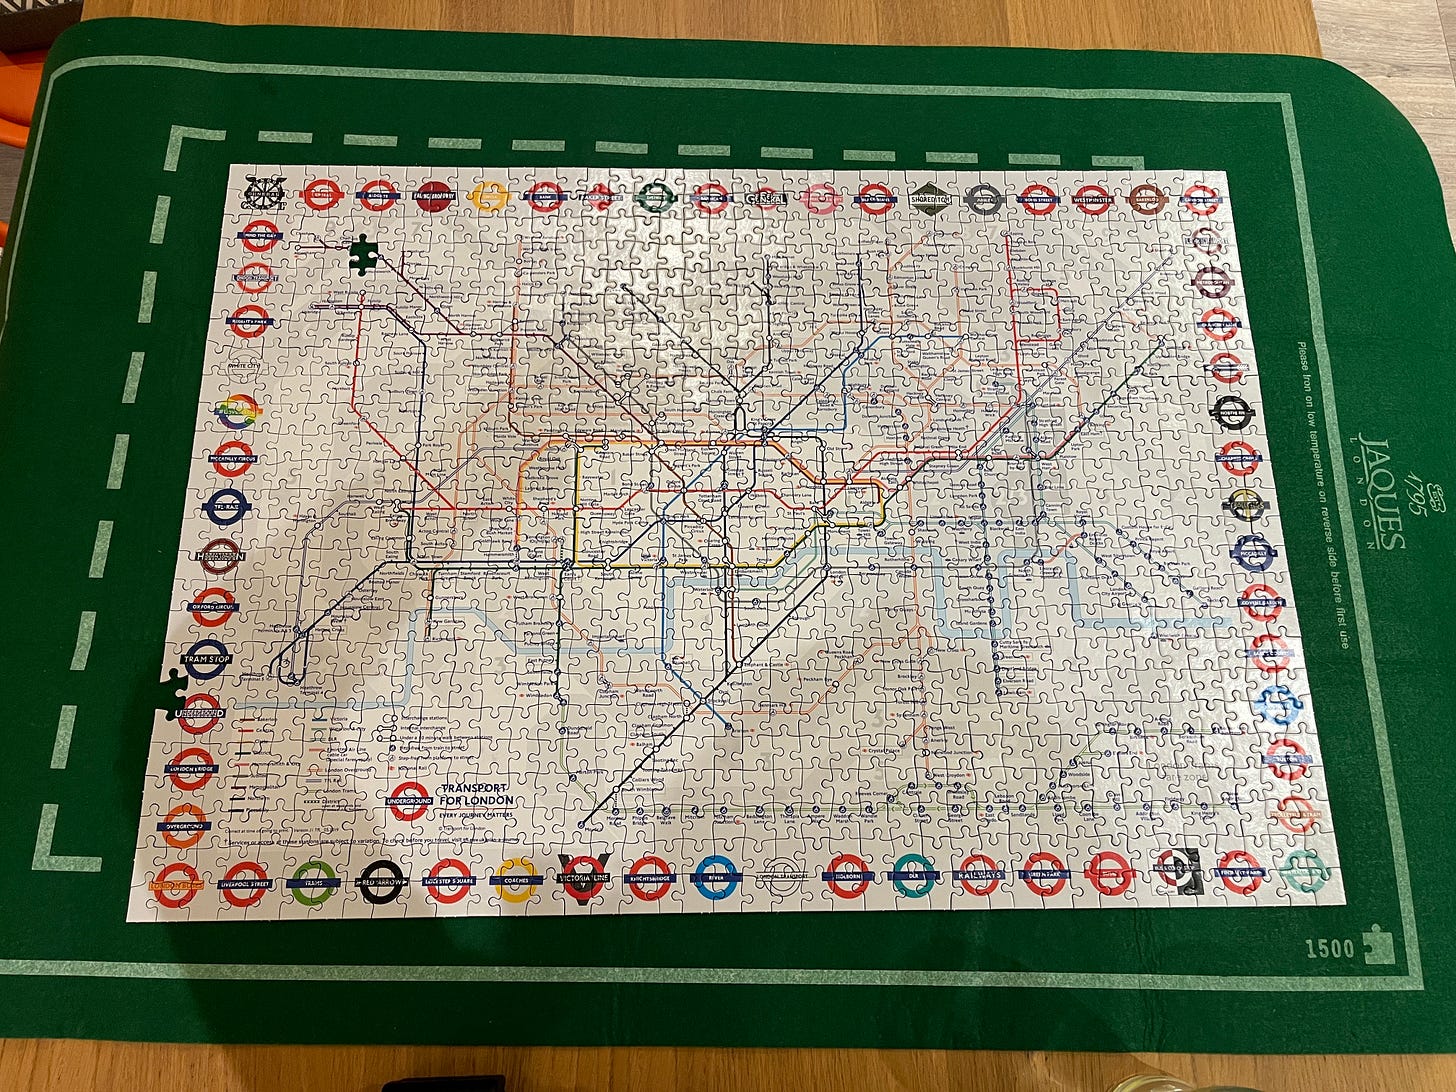 The finished Tube map jigsaw puzzle, missing one piece up near the top and one side piece